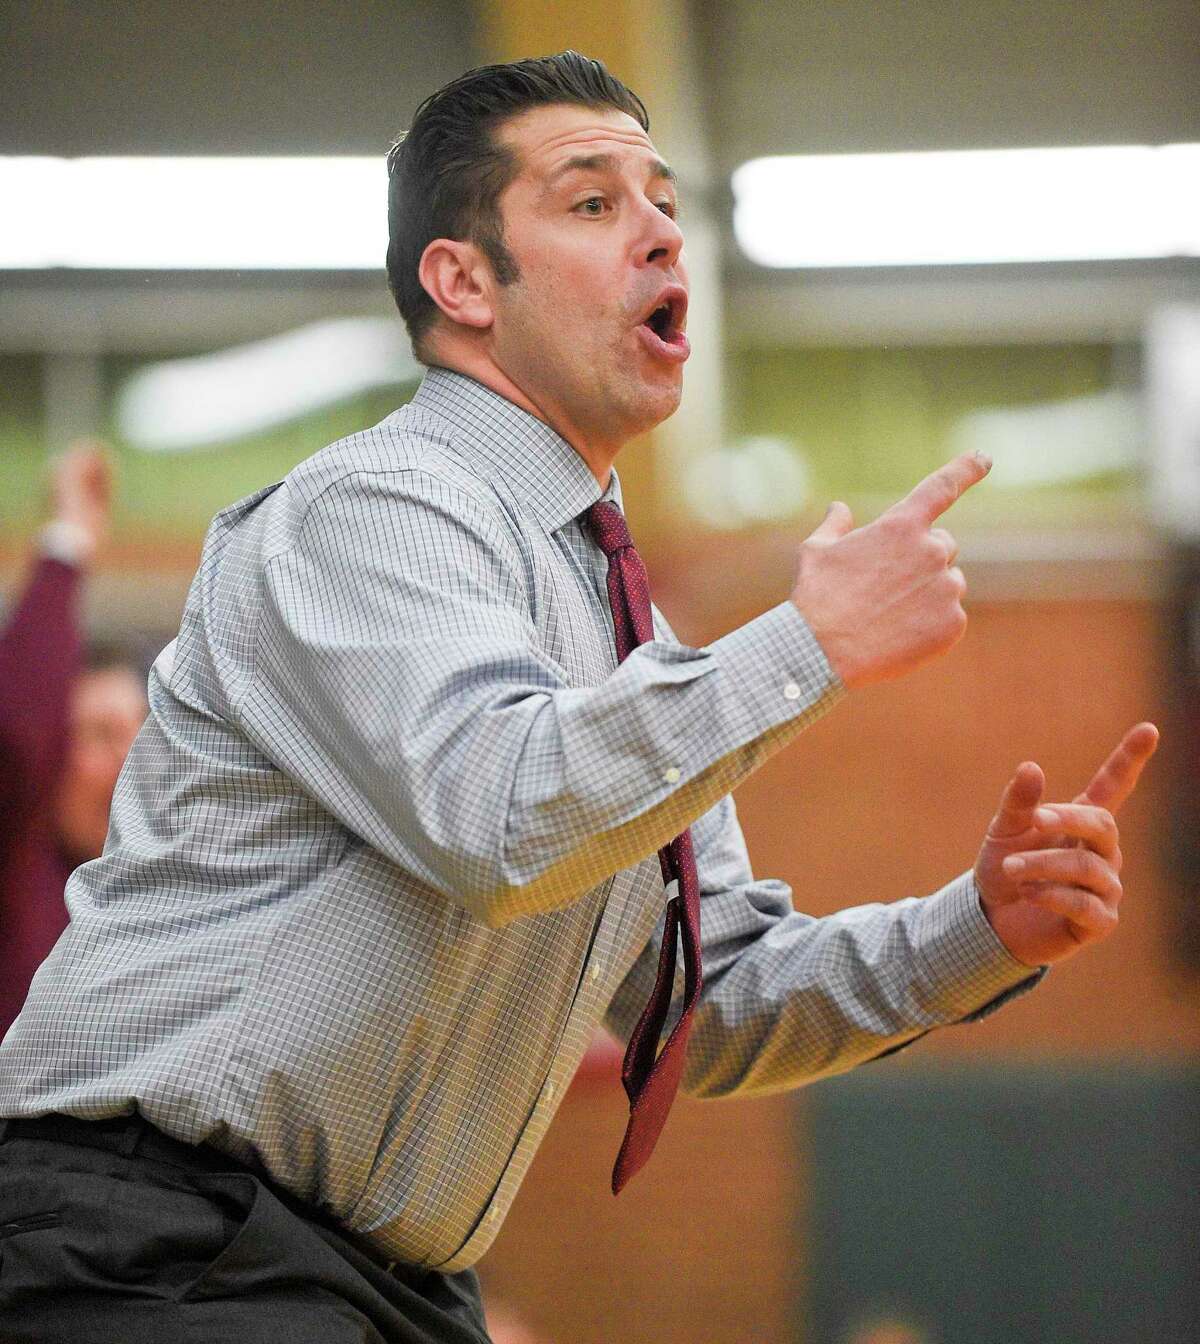 St Joseph coach Kevin Wielk reacts to play in a boys basketball game against Trinity Catholic at Walsh Court on Jan. 7, 2020 in Stamford, Connecticut.